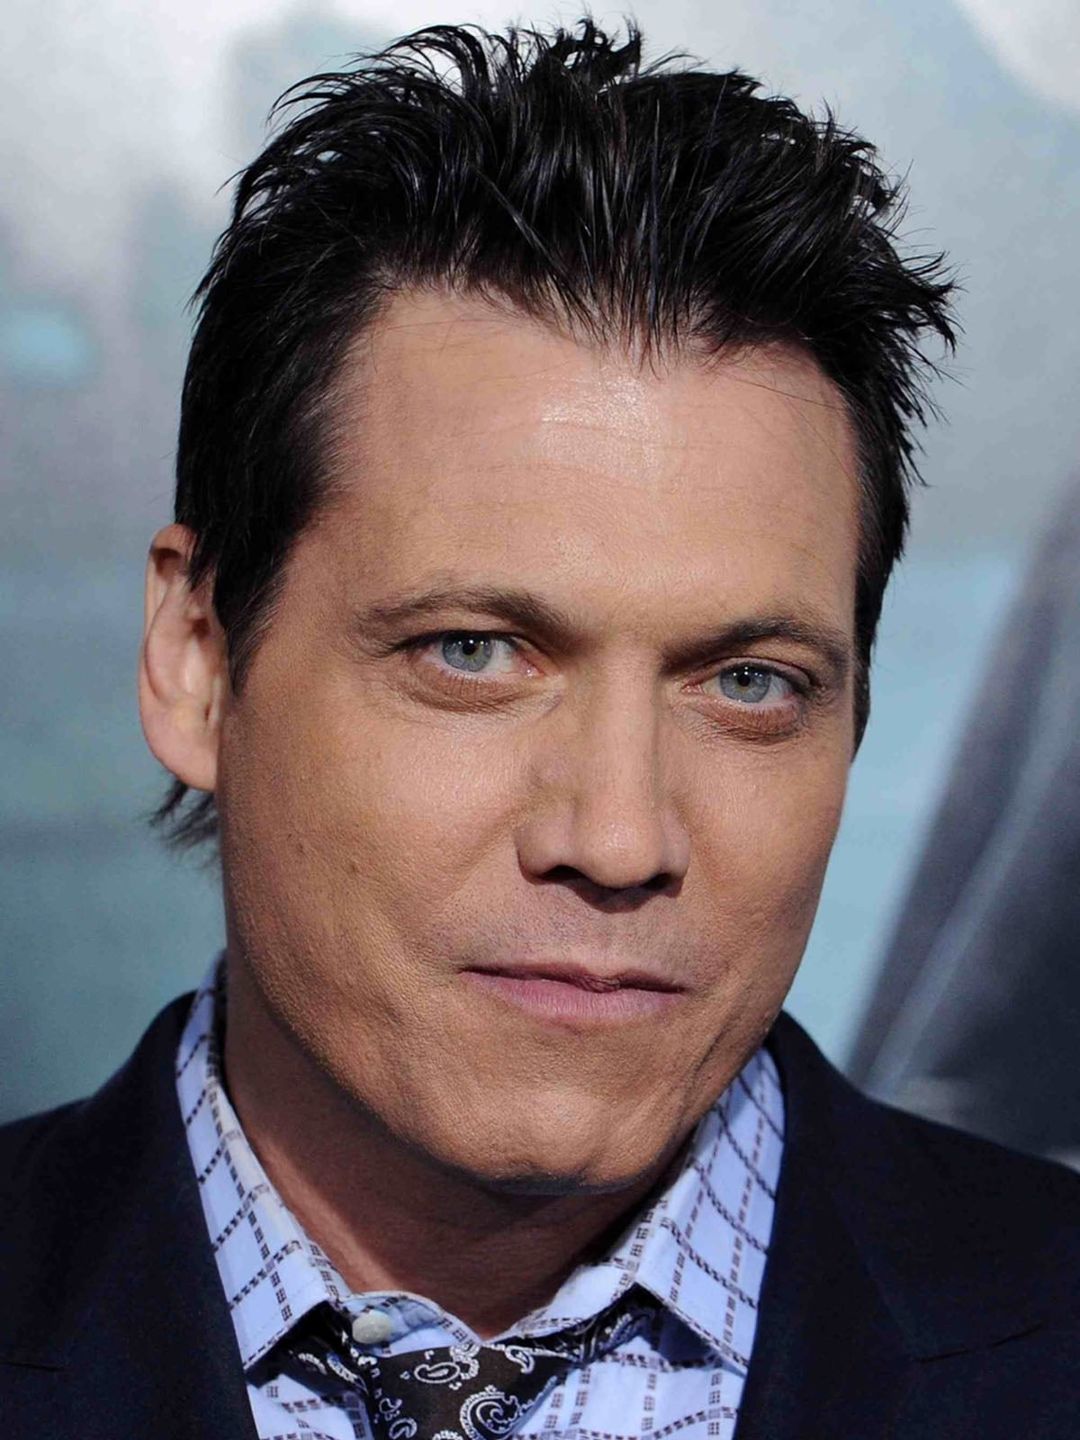 Holt McCallany current look